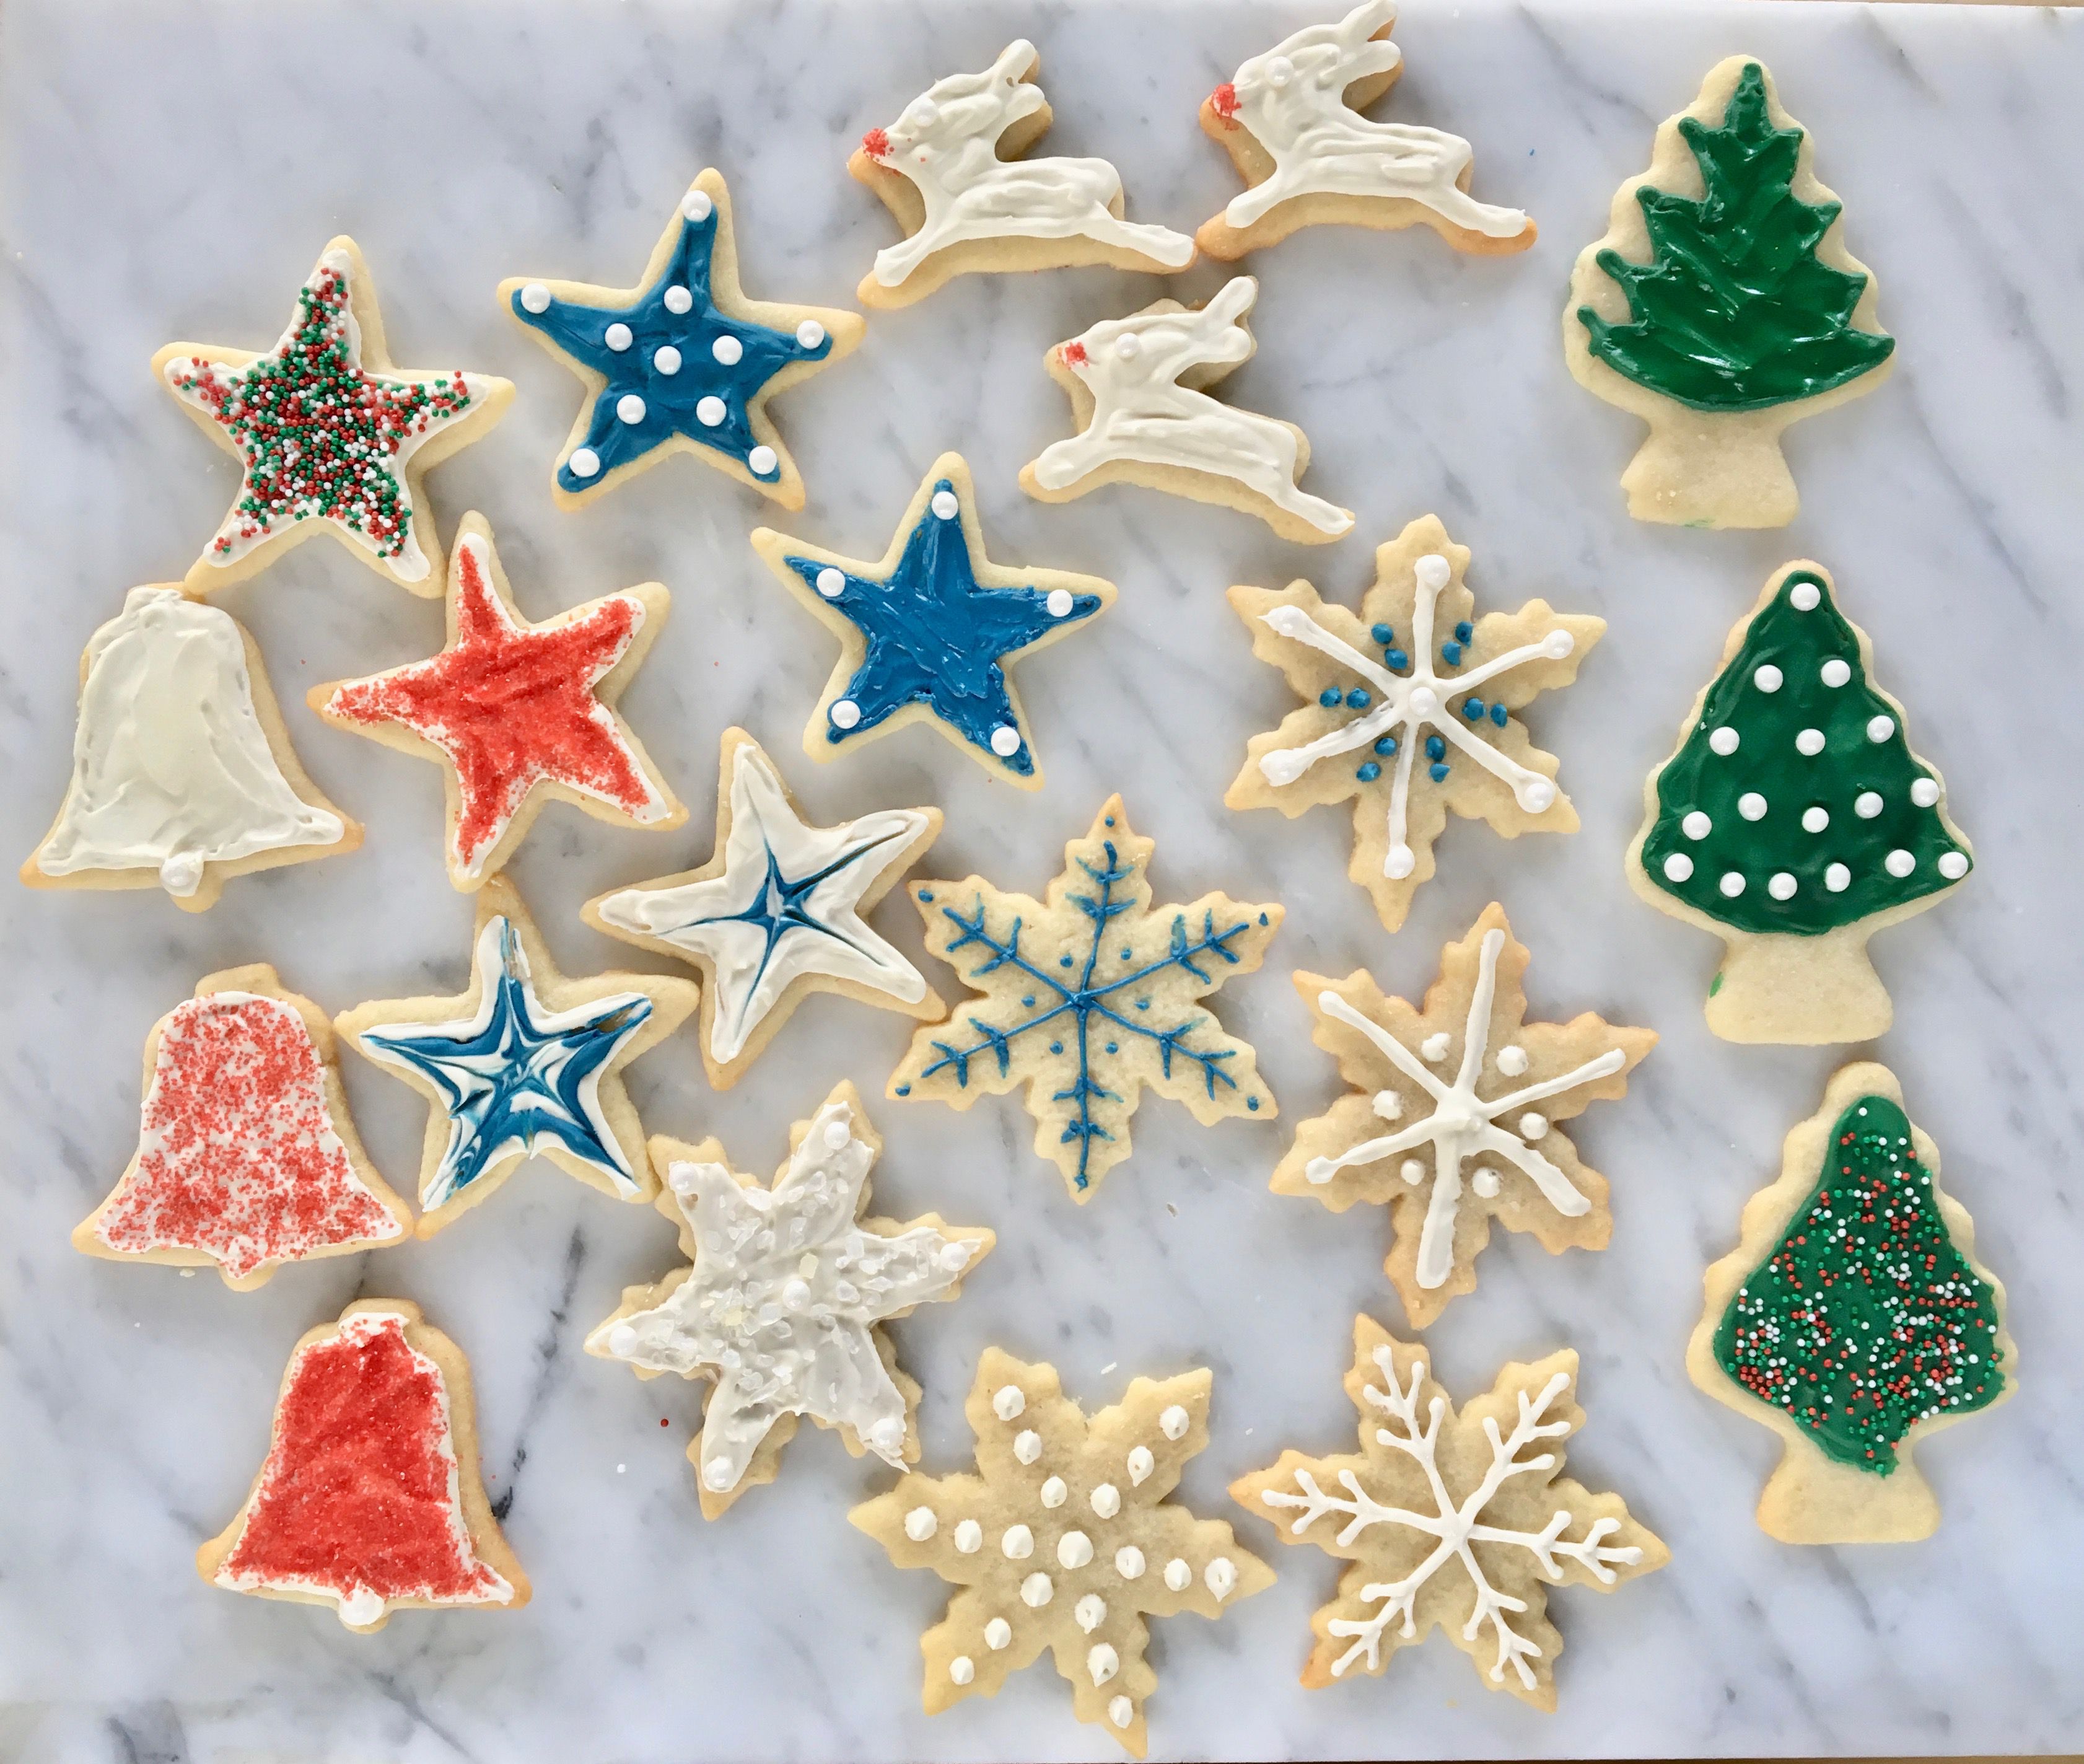 Pictures Of Christmas Cookies Decorated  Decorated Christmas Cutout